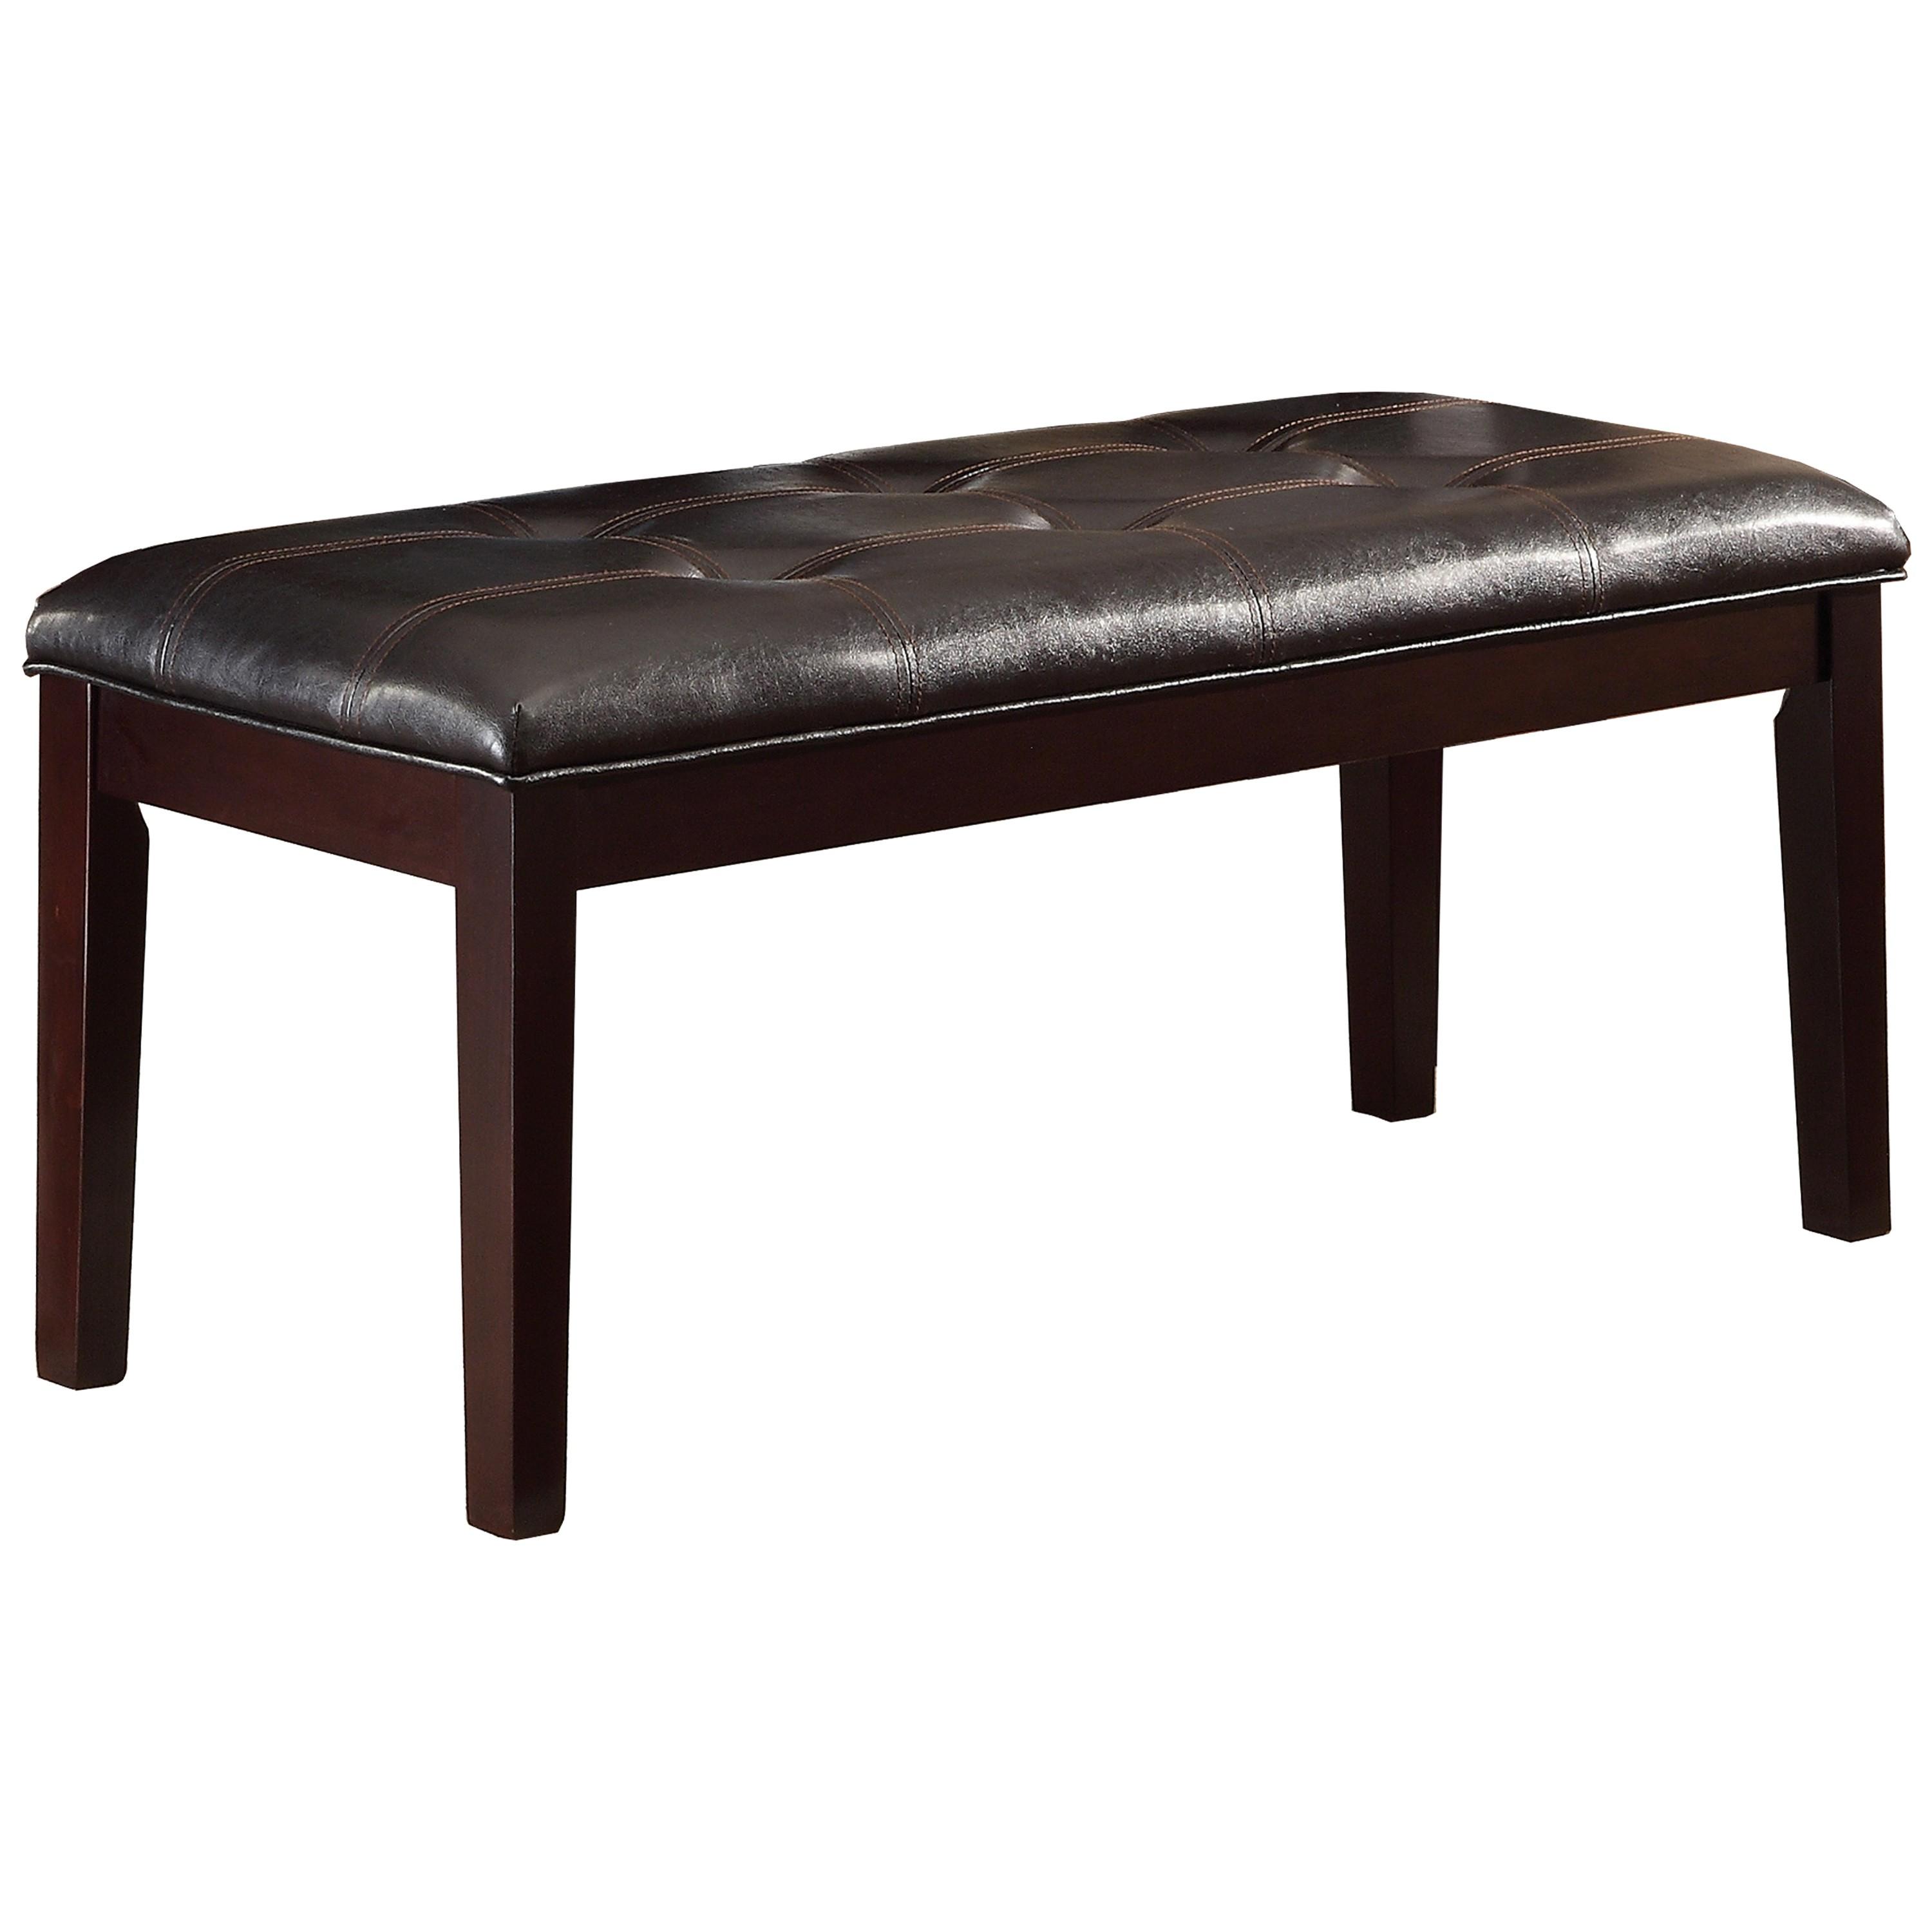 Transitional Dining Bench 2544-13 Teague 2544-13 in Espresso Faux Leather